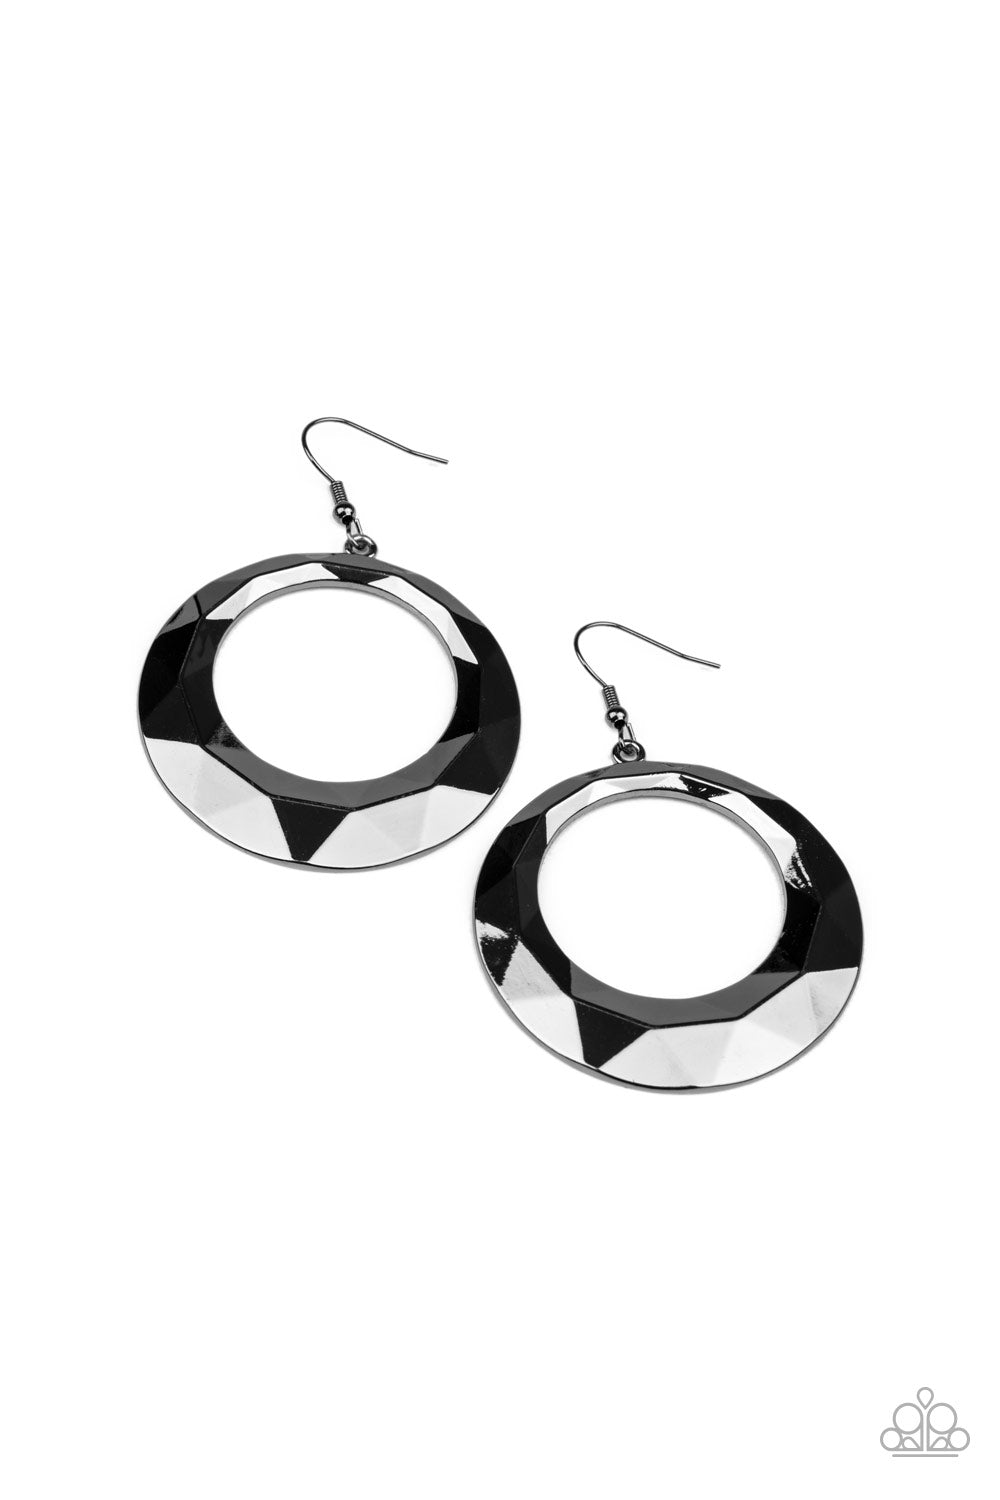 &lt;P&gt;Faceted in light-reflecting textures, a beveled gunmetal hoop swings from the ear for an edgy shine. Earring attaches to a standard fishhook fitting.&lt;/P&gt;  

&lt;P&gt; &lt;I&gt;  Sold as one pair of earrings. &lt;/I&gt;  &lt;/P&gt;


&lt;img src=\&quot;https://d9b54x484lq62.cloudfront.net/paparazzi/shopping/images/517_tag150x115_1.png\&quot; alt=\&quot;New Kit\&quot; align=\&quot;middle\&quot; height=\&quot;50\&quot; width=\&quot;50\&quot;/&gt;